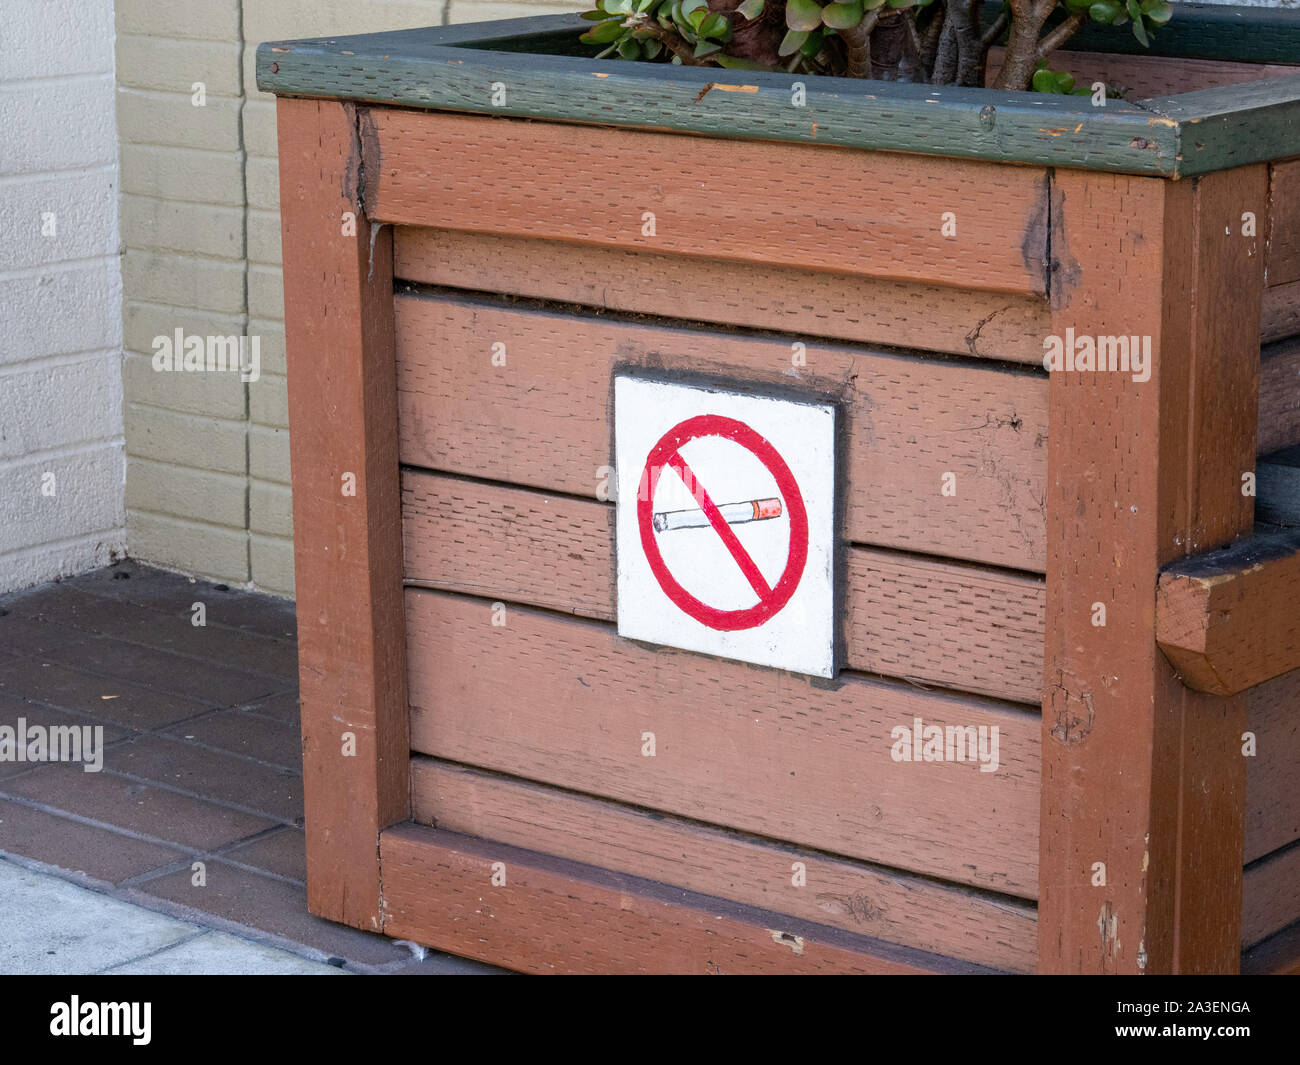 Cigarette crossed out no smoking sign on outdoor area Stock Photo